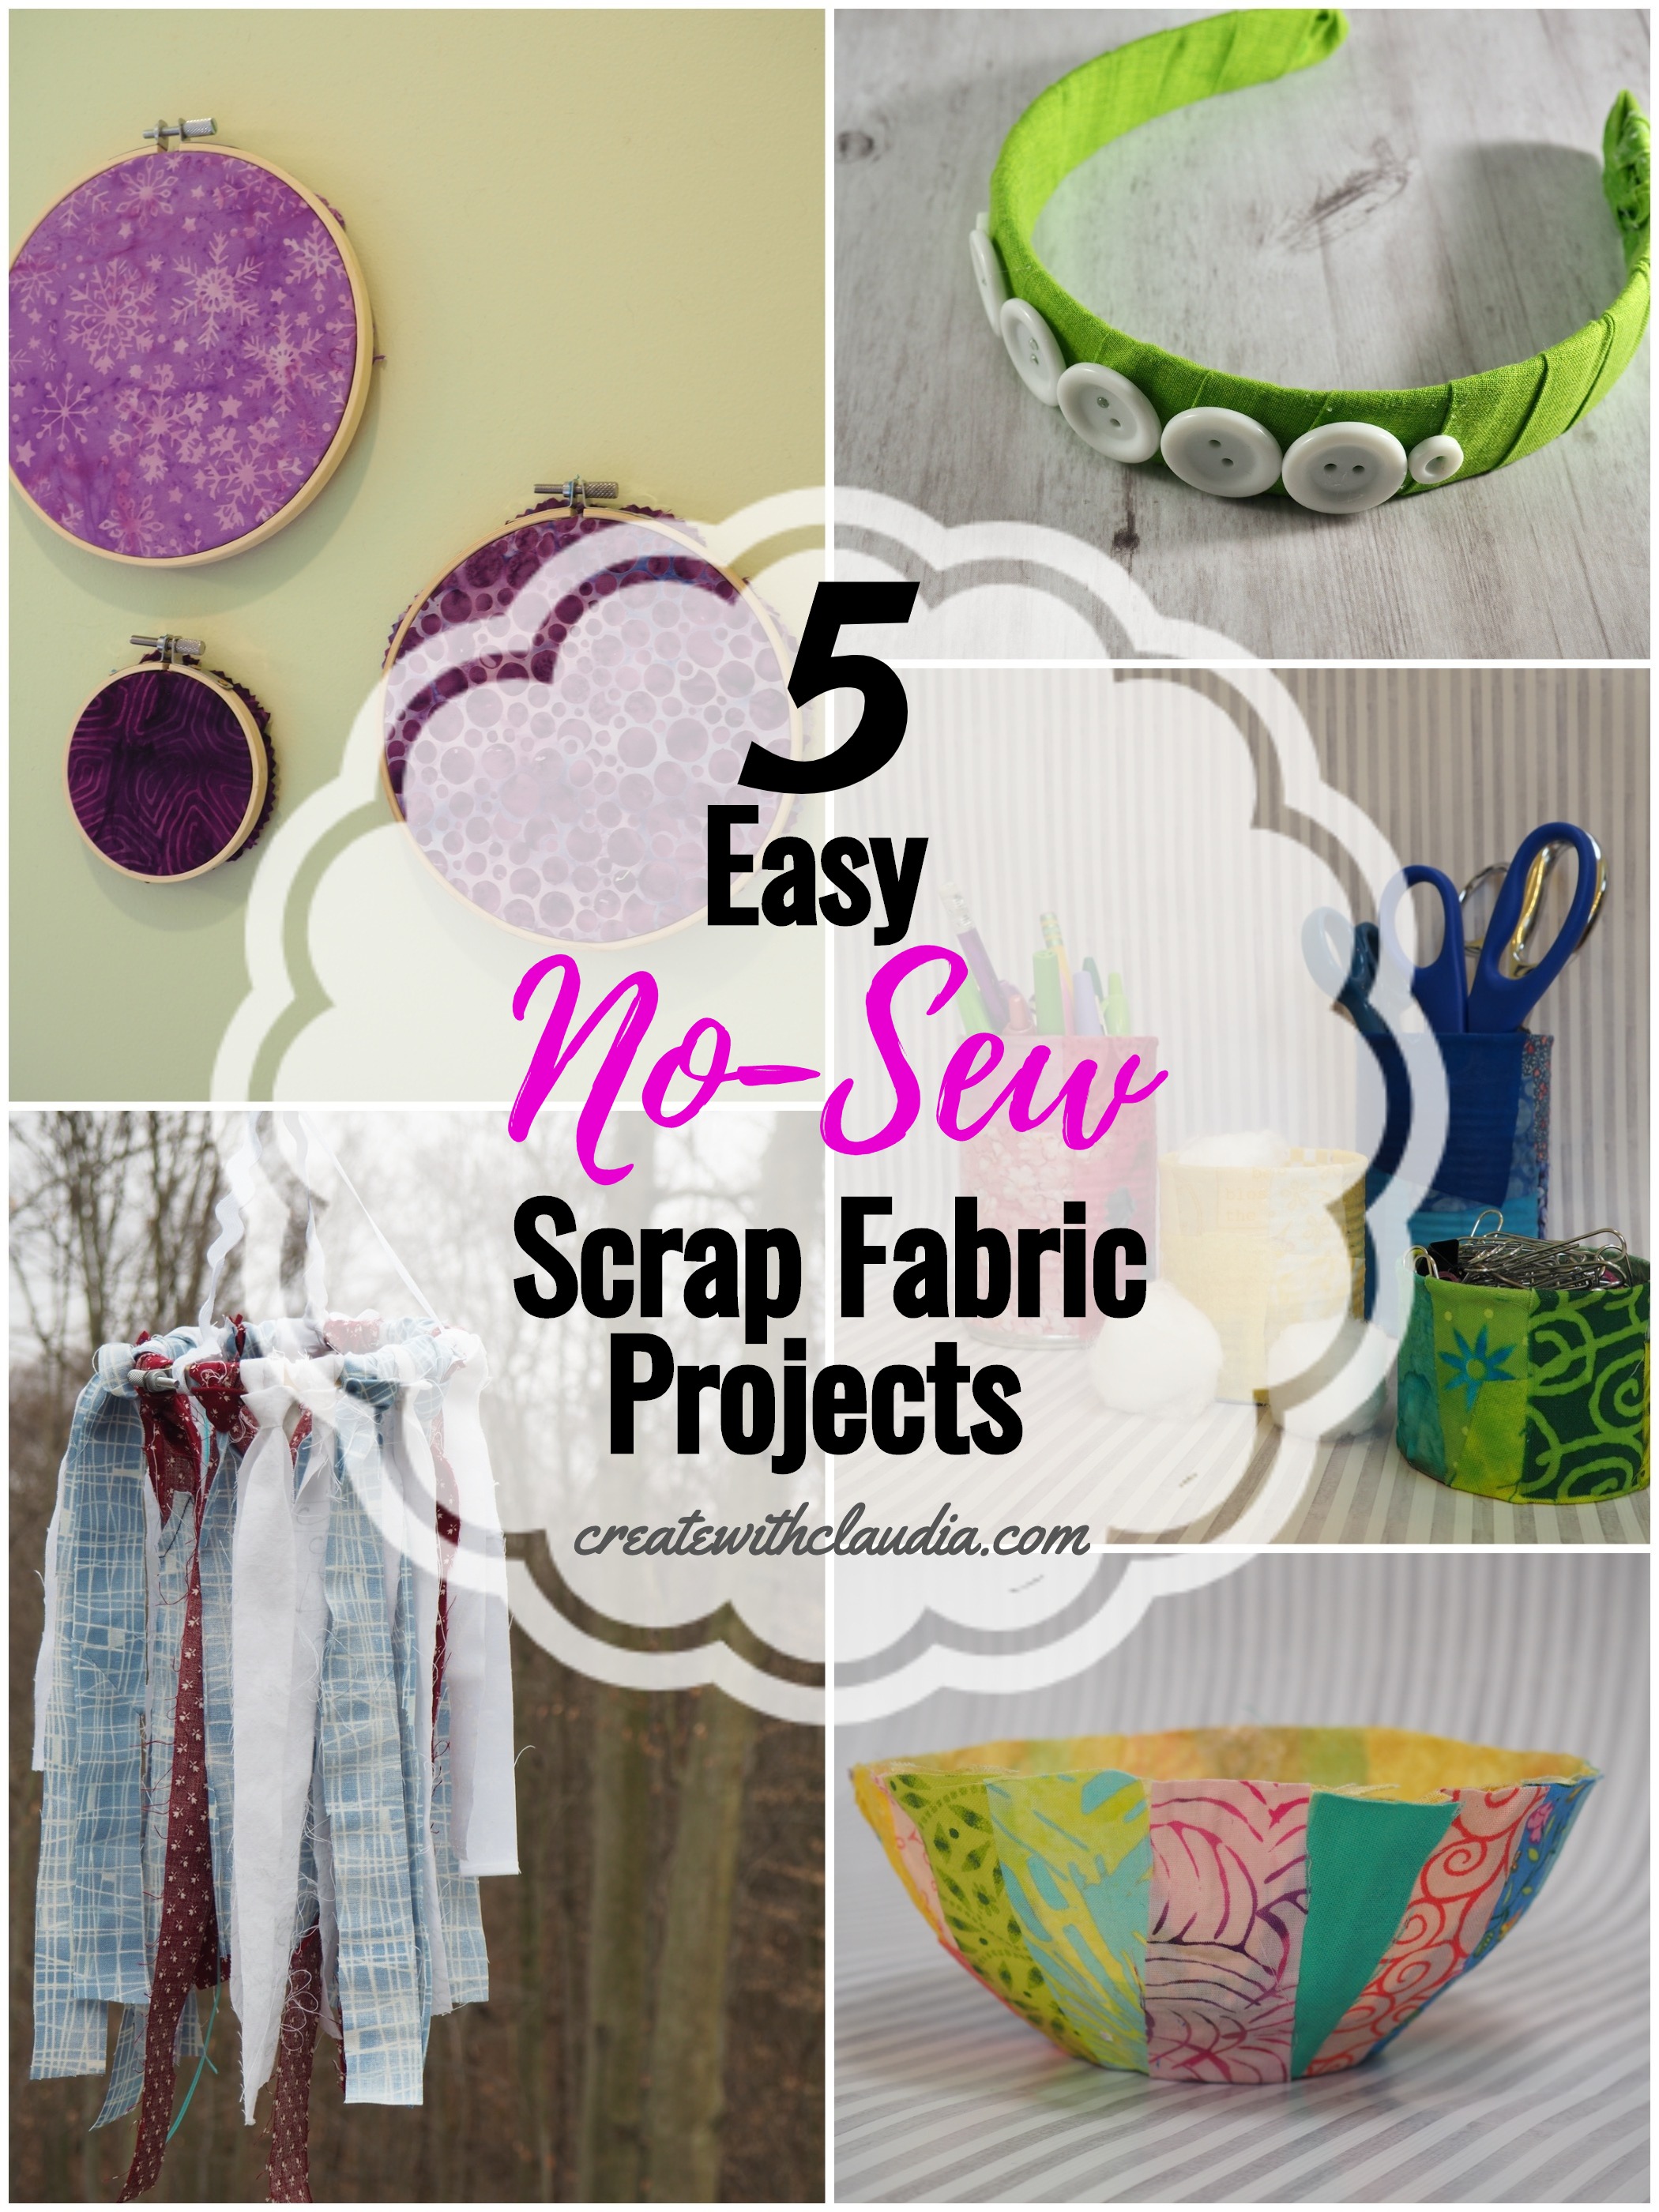 Use Up Scrap Fabric With Me! 5 Quick & Easy Sewing Projects Episode 3 